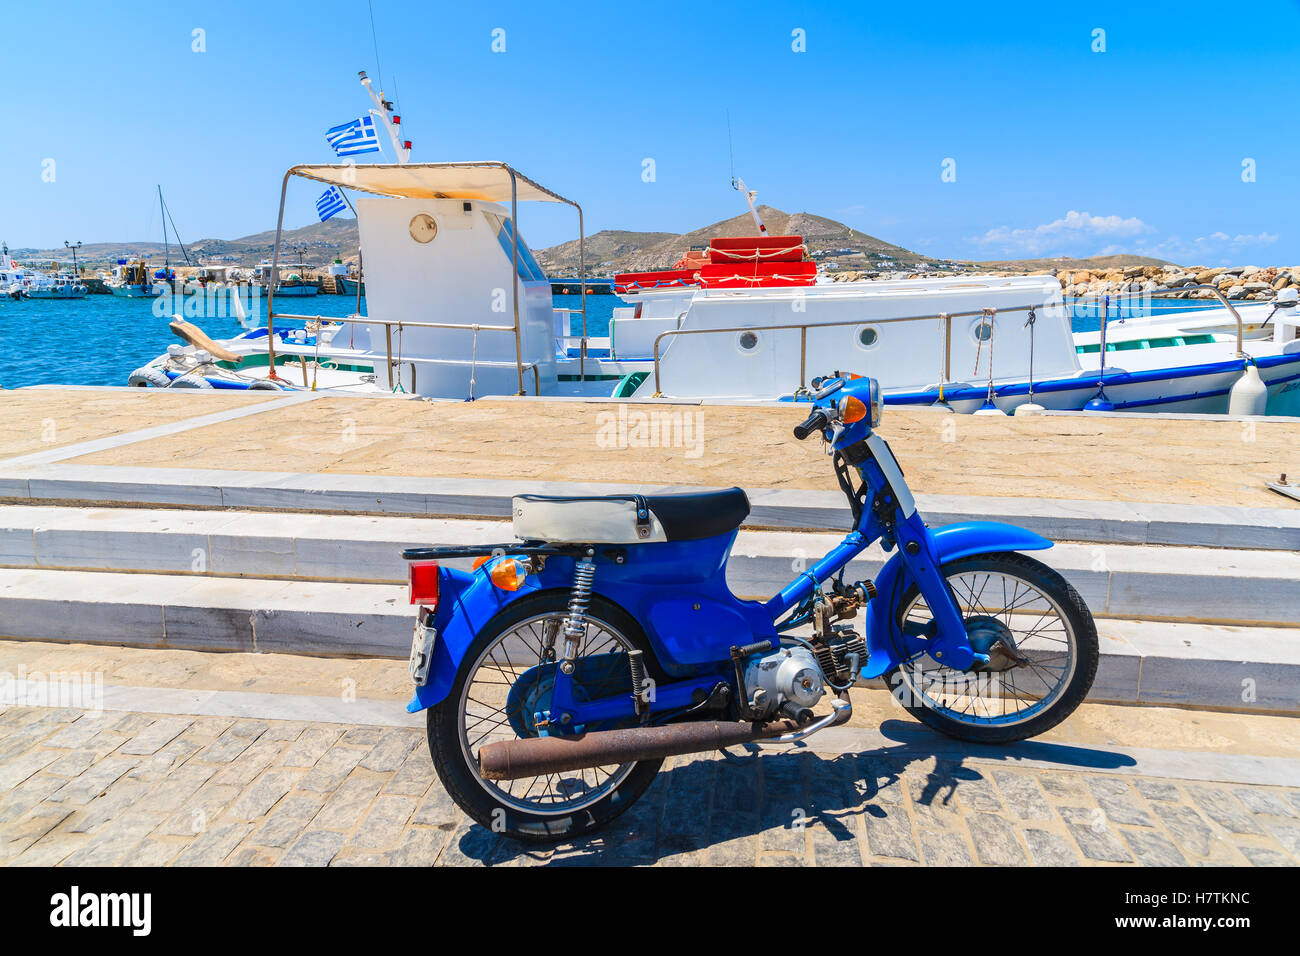 A Peugeot speedfight 2 french scooter parked on the seafront Santorini  greece Stock Photo - Alamy